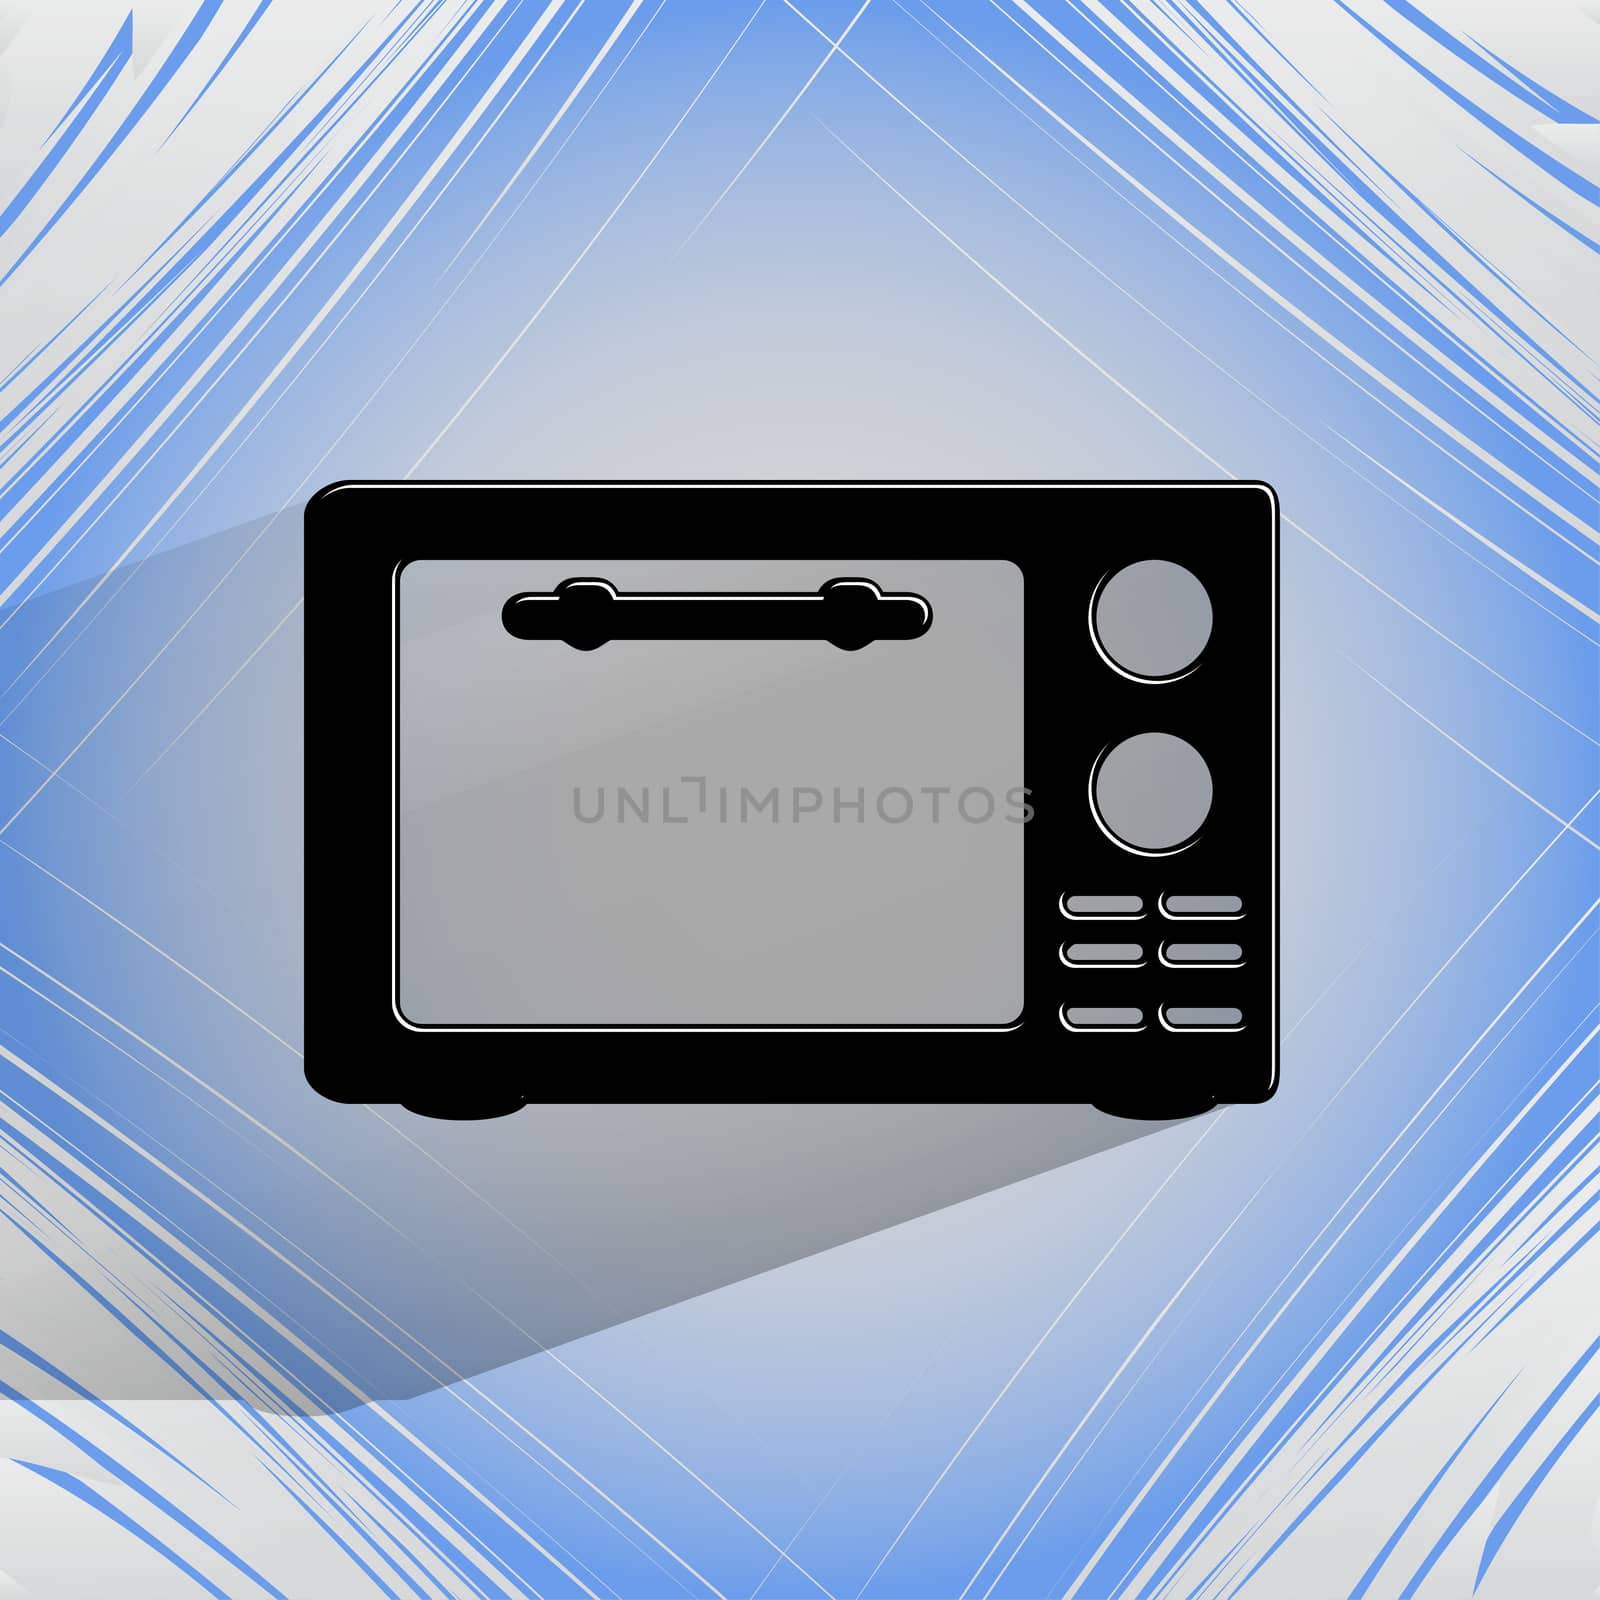 microwave. kitchen equipment. Flat modern web button  on a flat geometric abstract background  by serhii_lohvyniuk